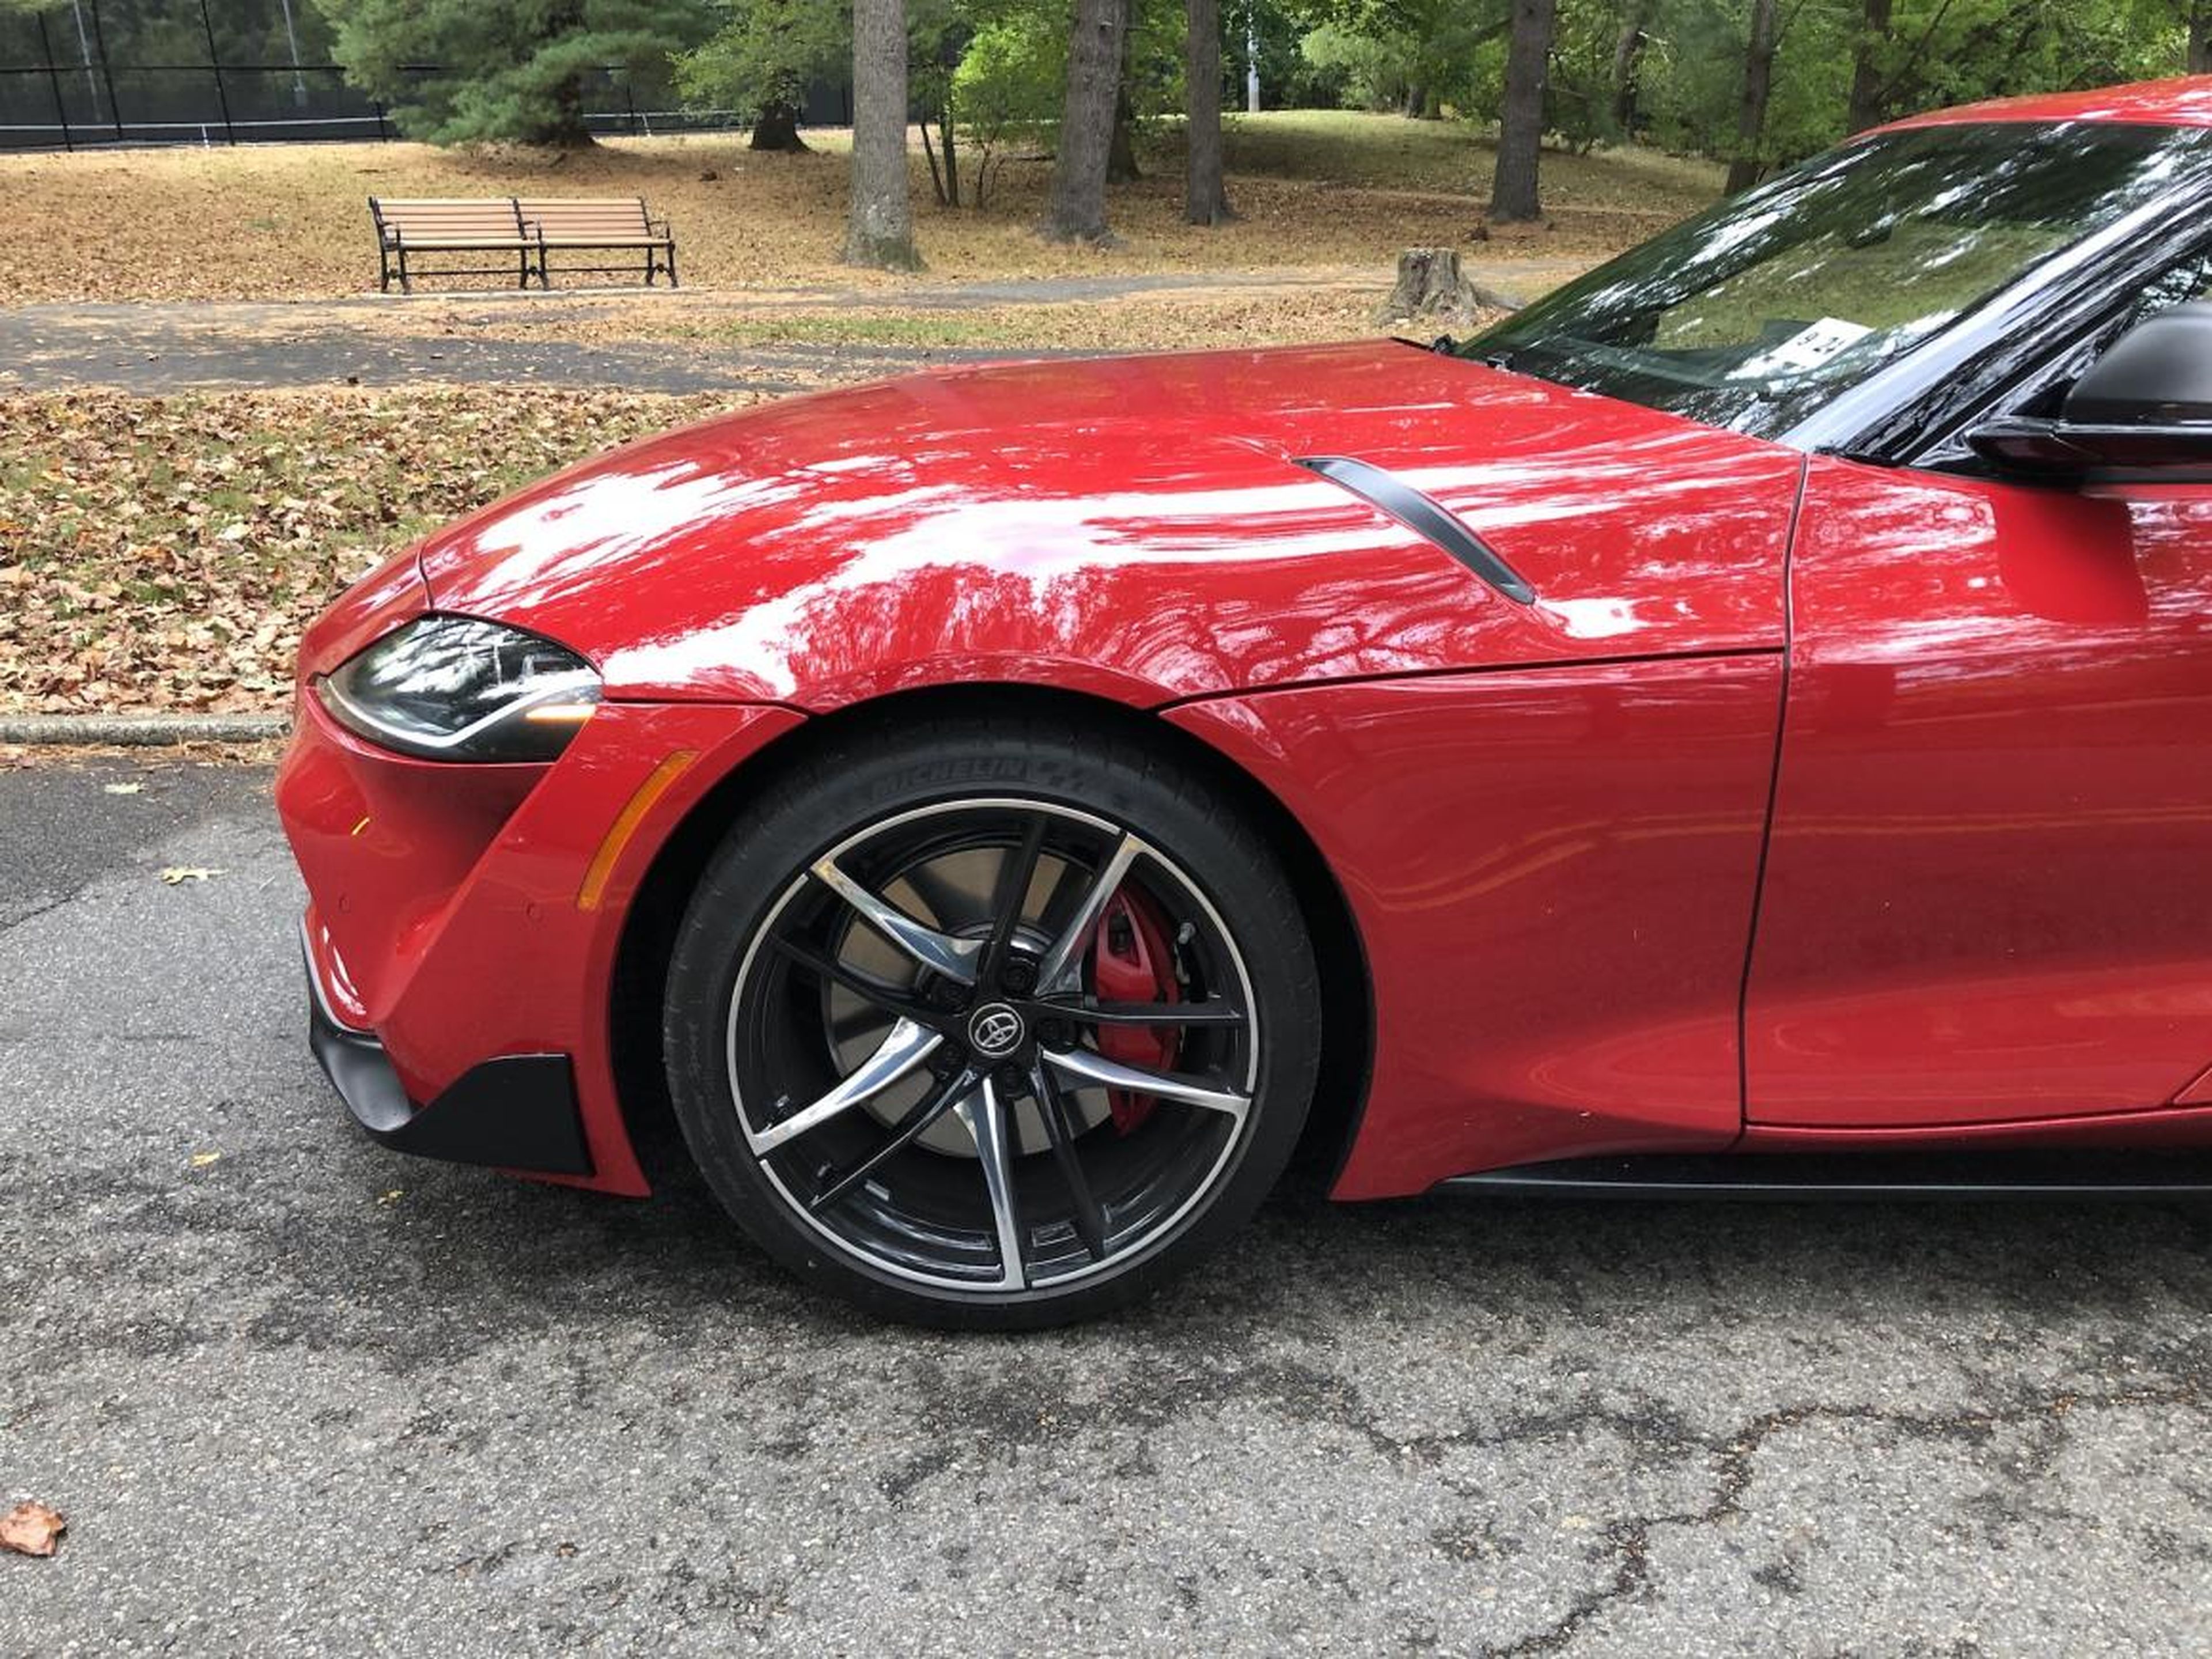 The hood creates a compelling illusion of length, giving the Supra a GT car's vibe even though it lacks a back seat. My tester's 19-inch forged allow wheels concealed vented-disc Brembo brakes, with red calipers.